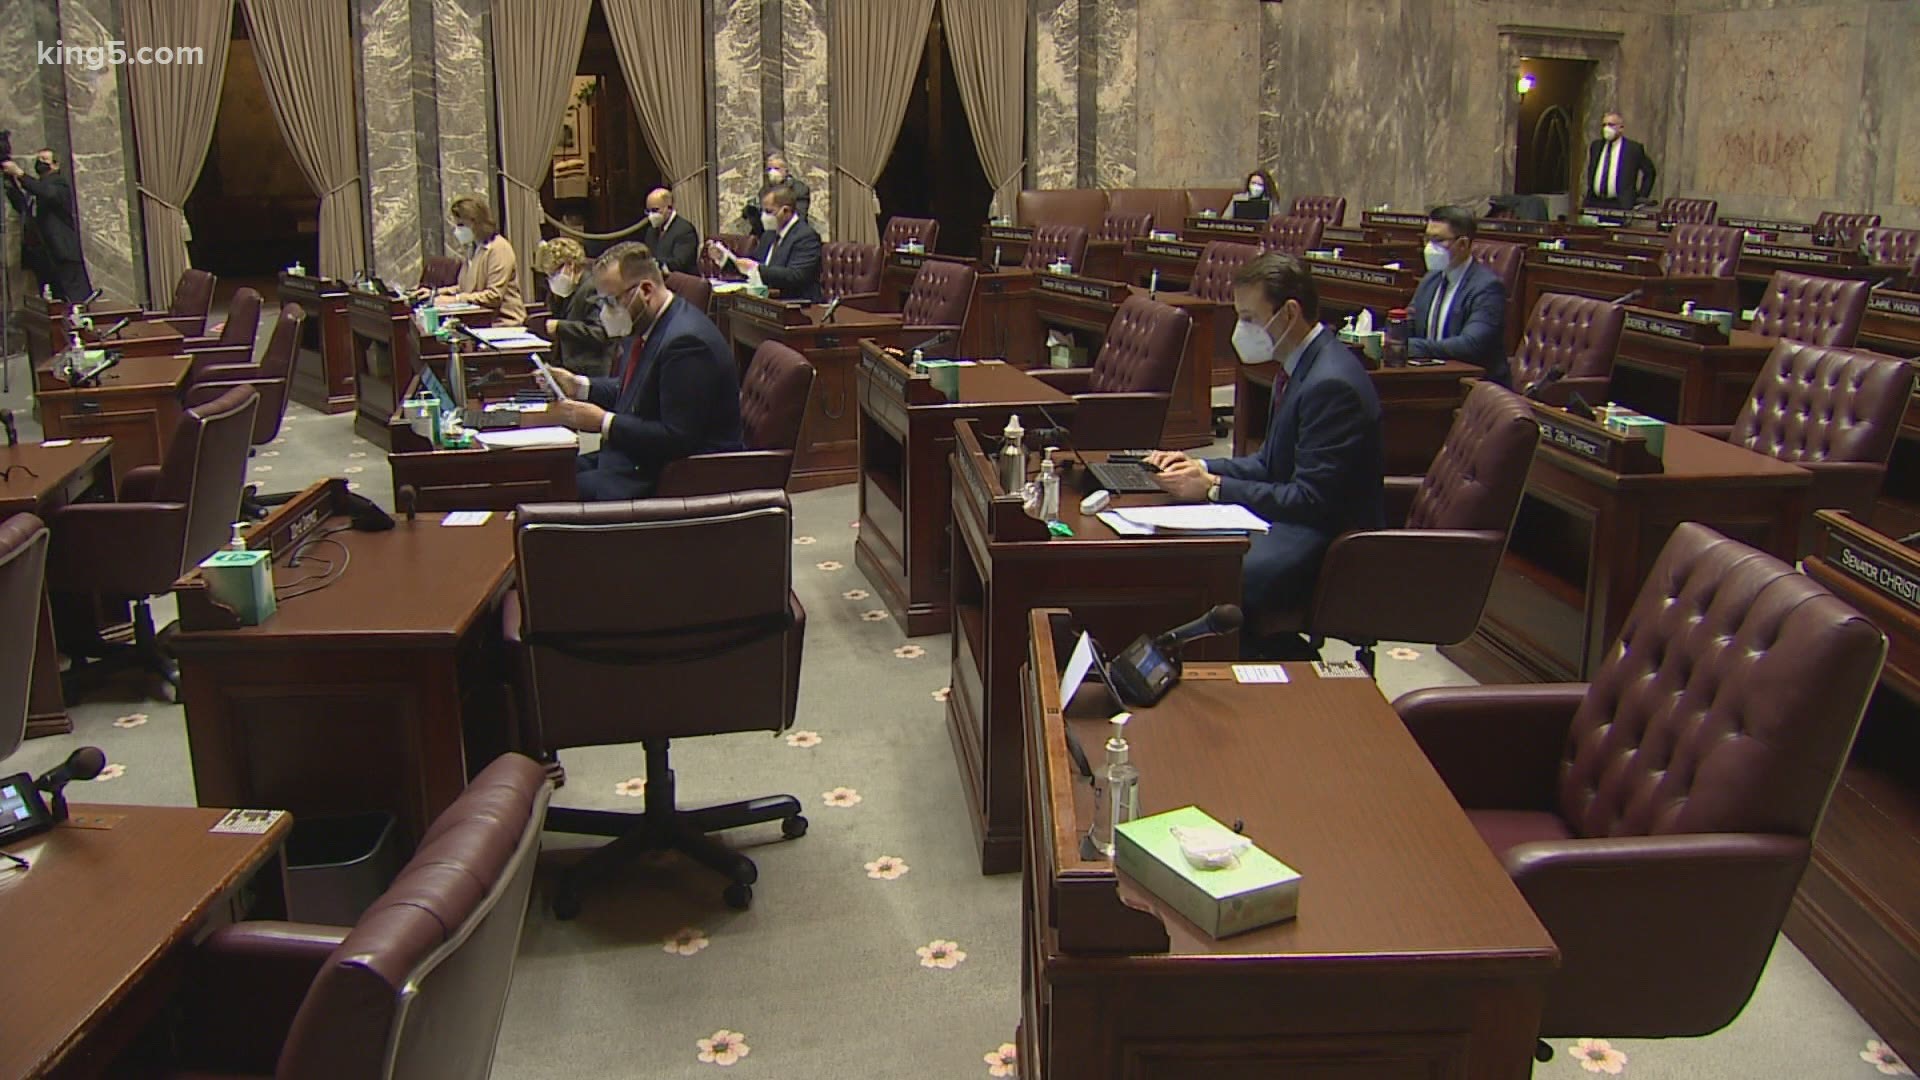 State lawmakers passed rules to make the rest of the 2021 session mostly virtual. The first day of the session happened amid heighted security due to recent unrest.